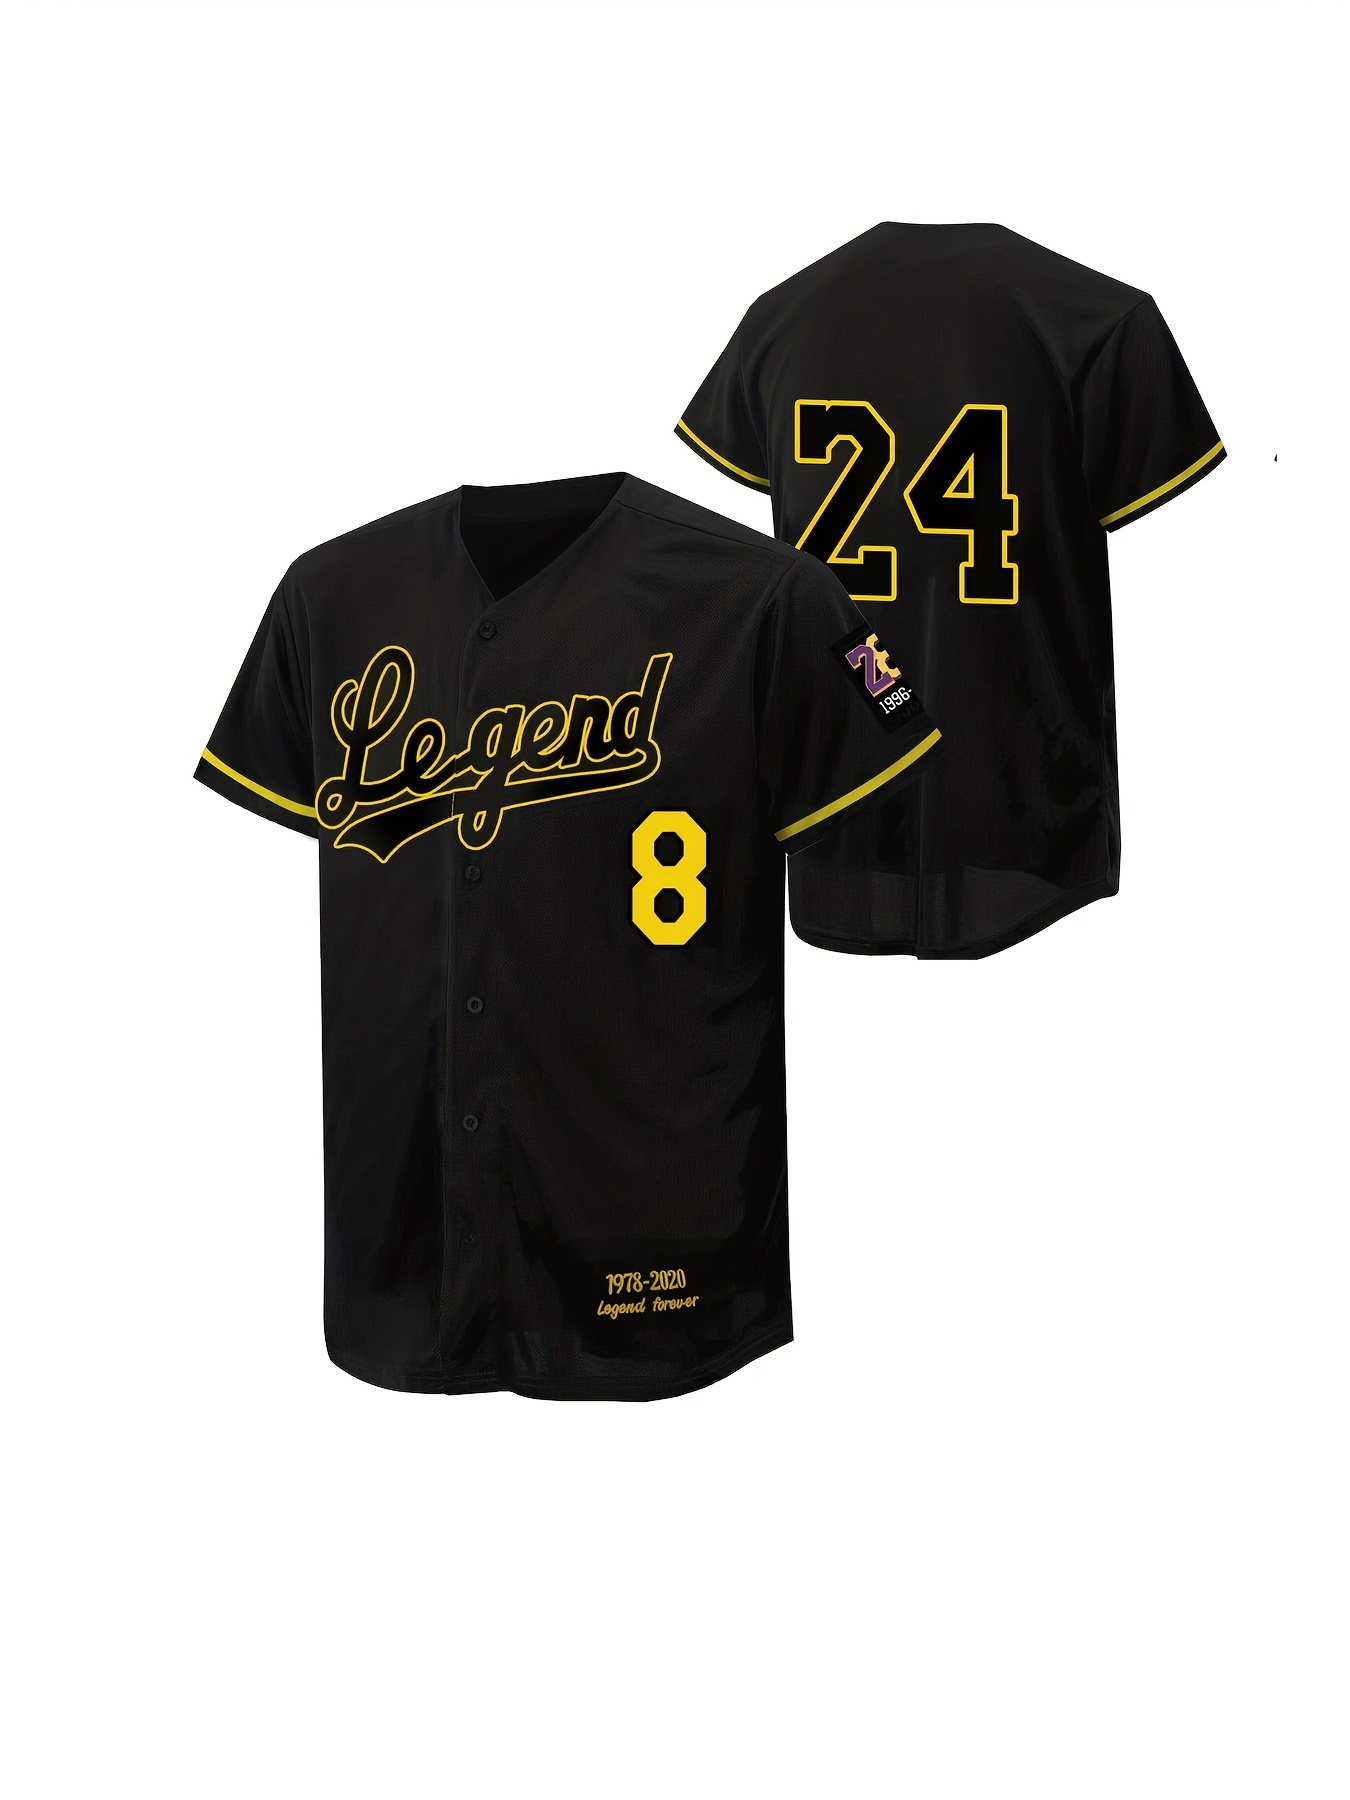 Men's Baseball Jersey, Retro Classic Baseball Shirt, Breathable Embroidery Sports Uniform for Training Competition Party,Temu